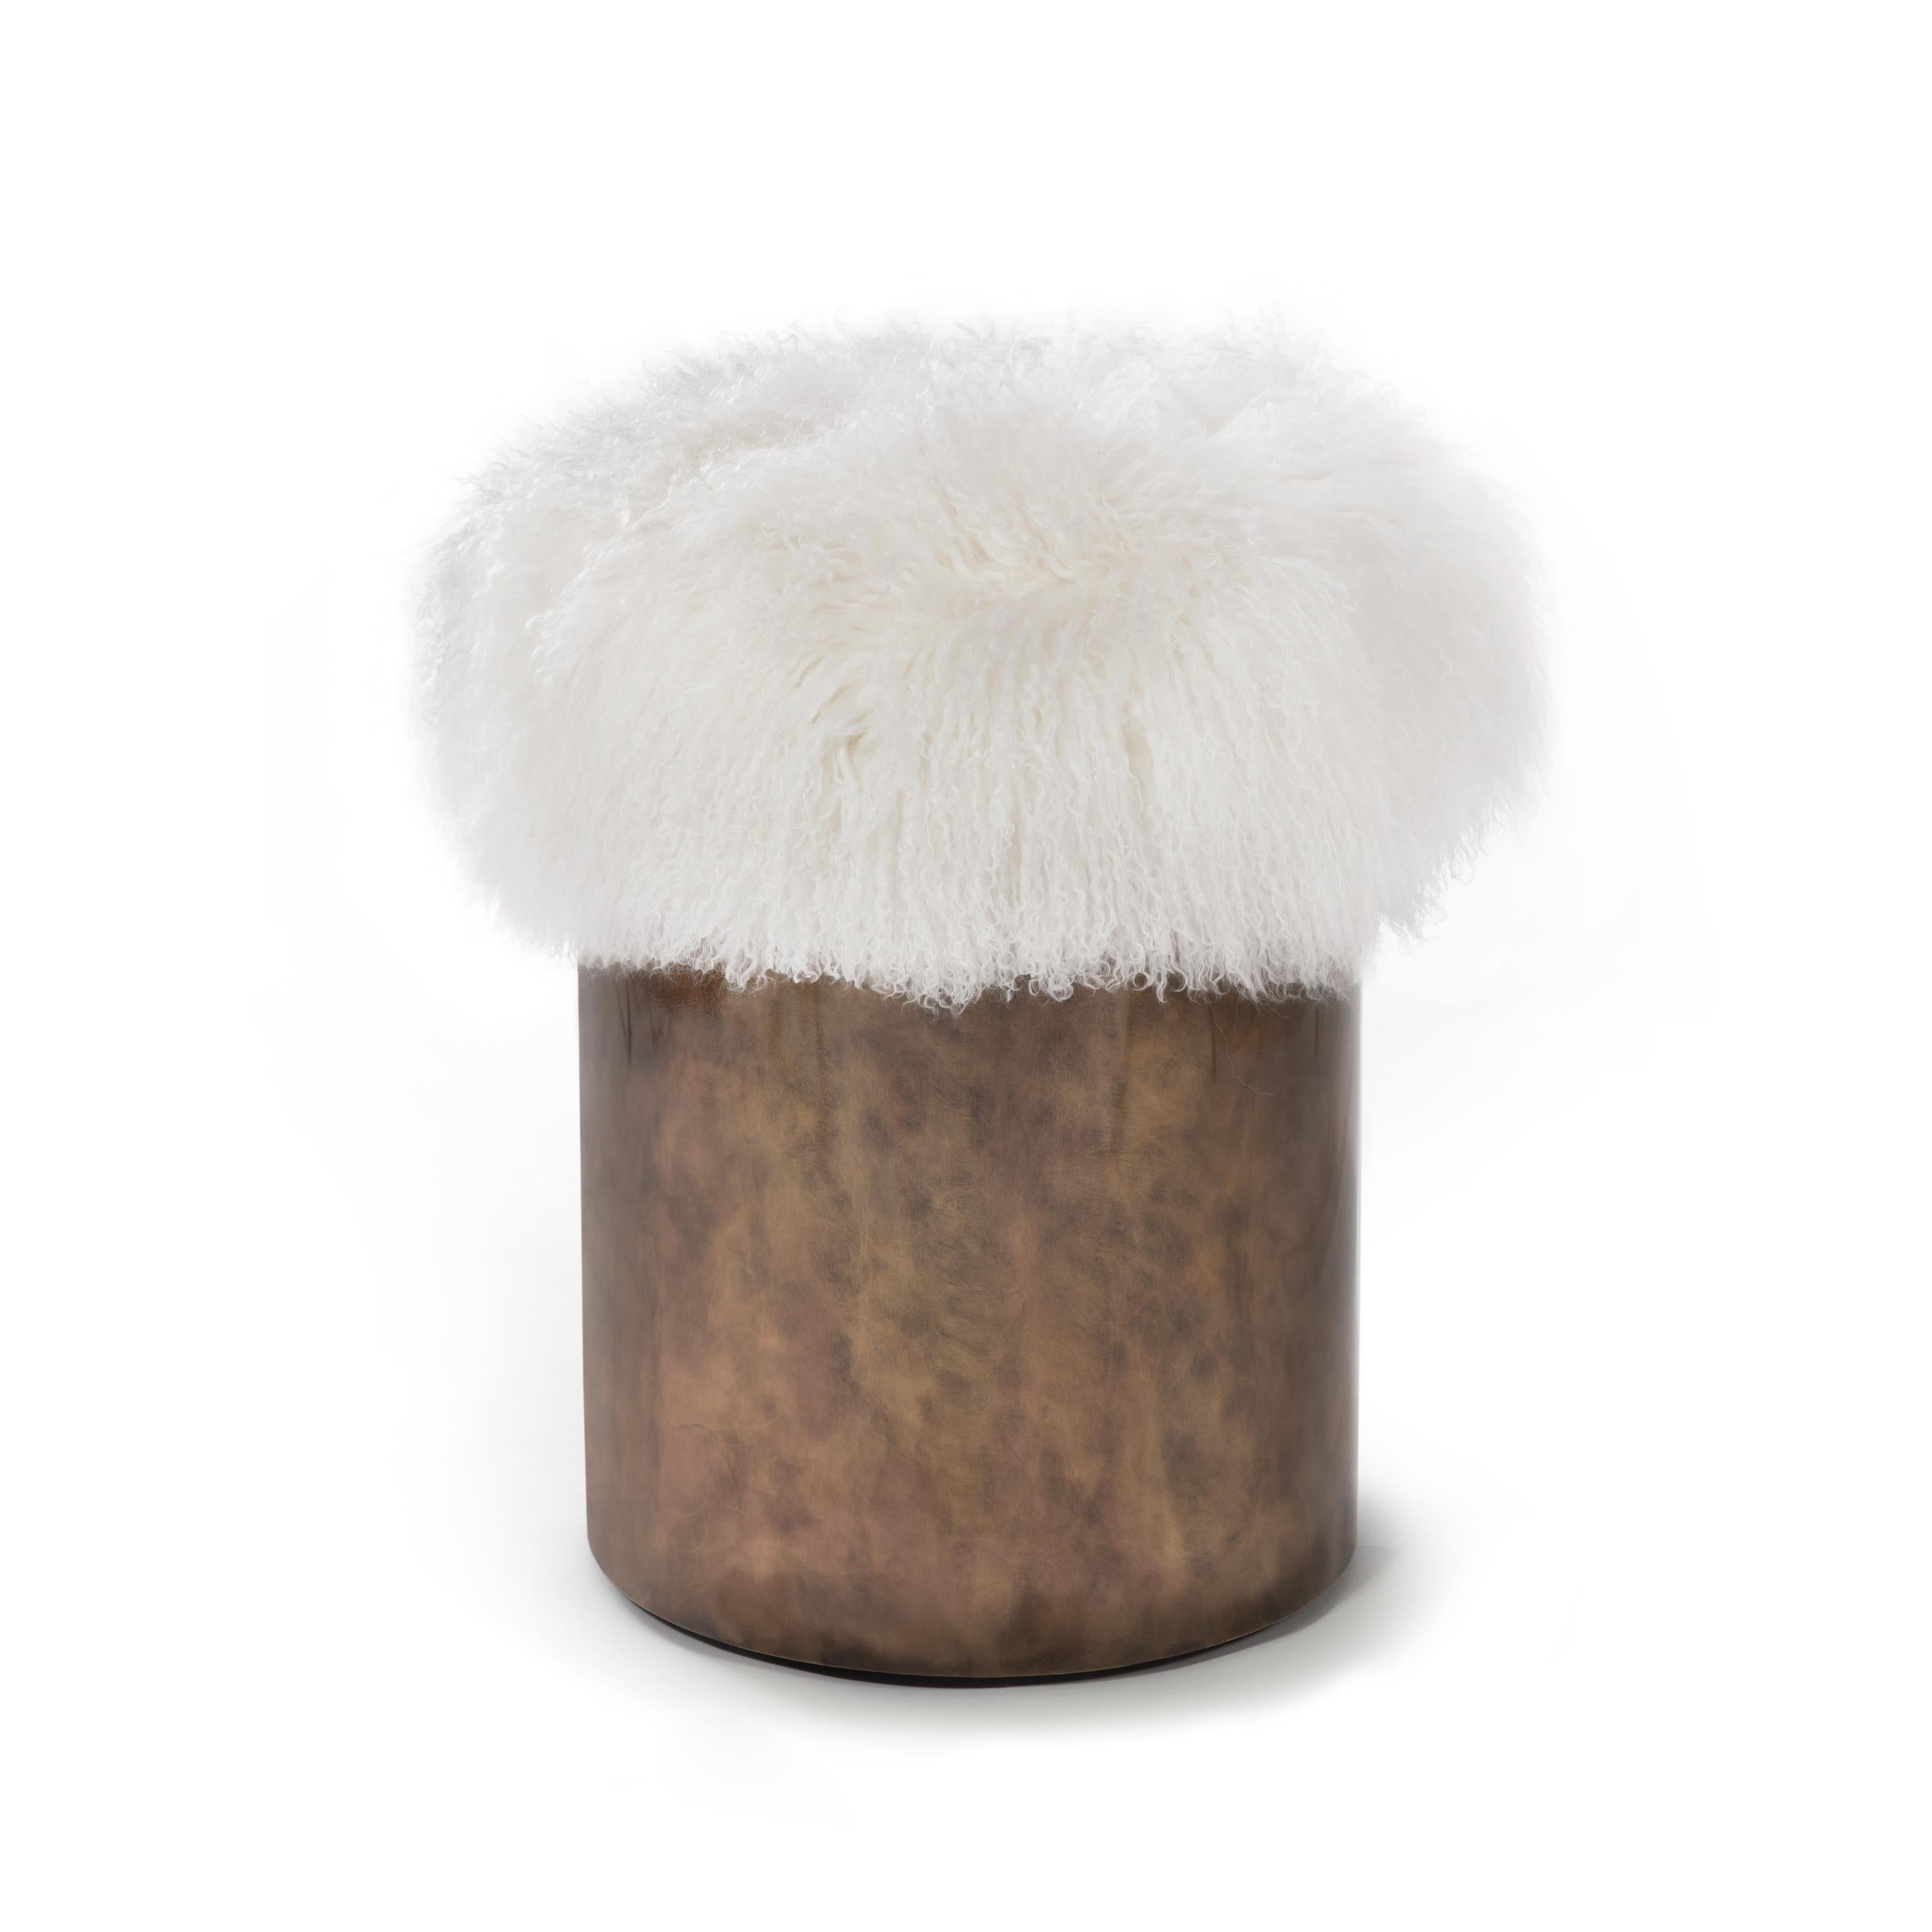 Symphony Stool, Fur and Rustic Brass, InsidherLand by Joana Santos Barbosa For Sale 2